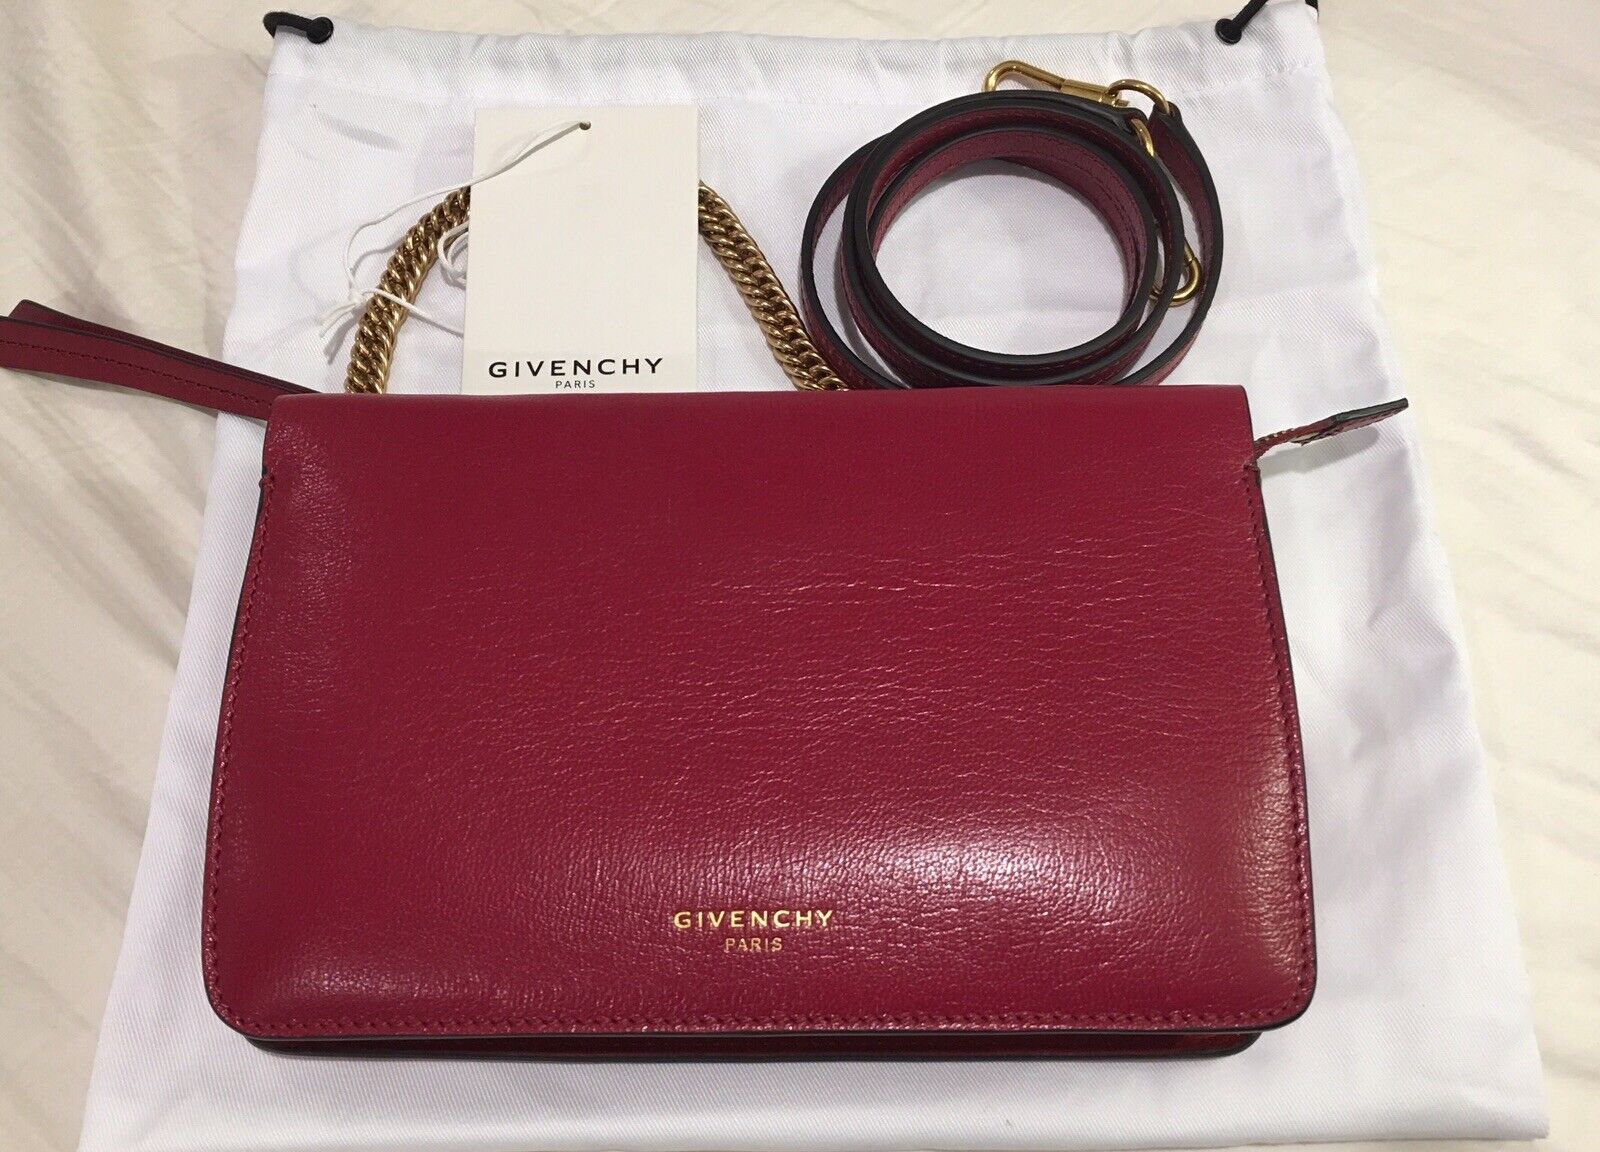 GIVENCHY Cross3 Leather & Suede Shoulder CrossBody Bag MSRP $1190 100%  AUTHENTIC